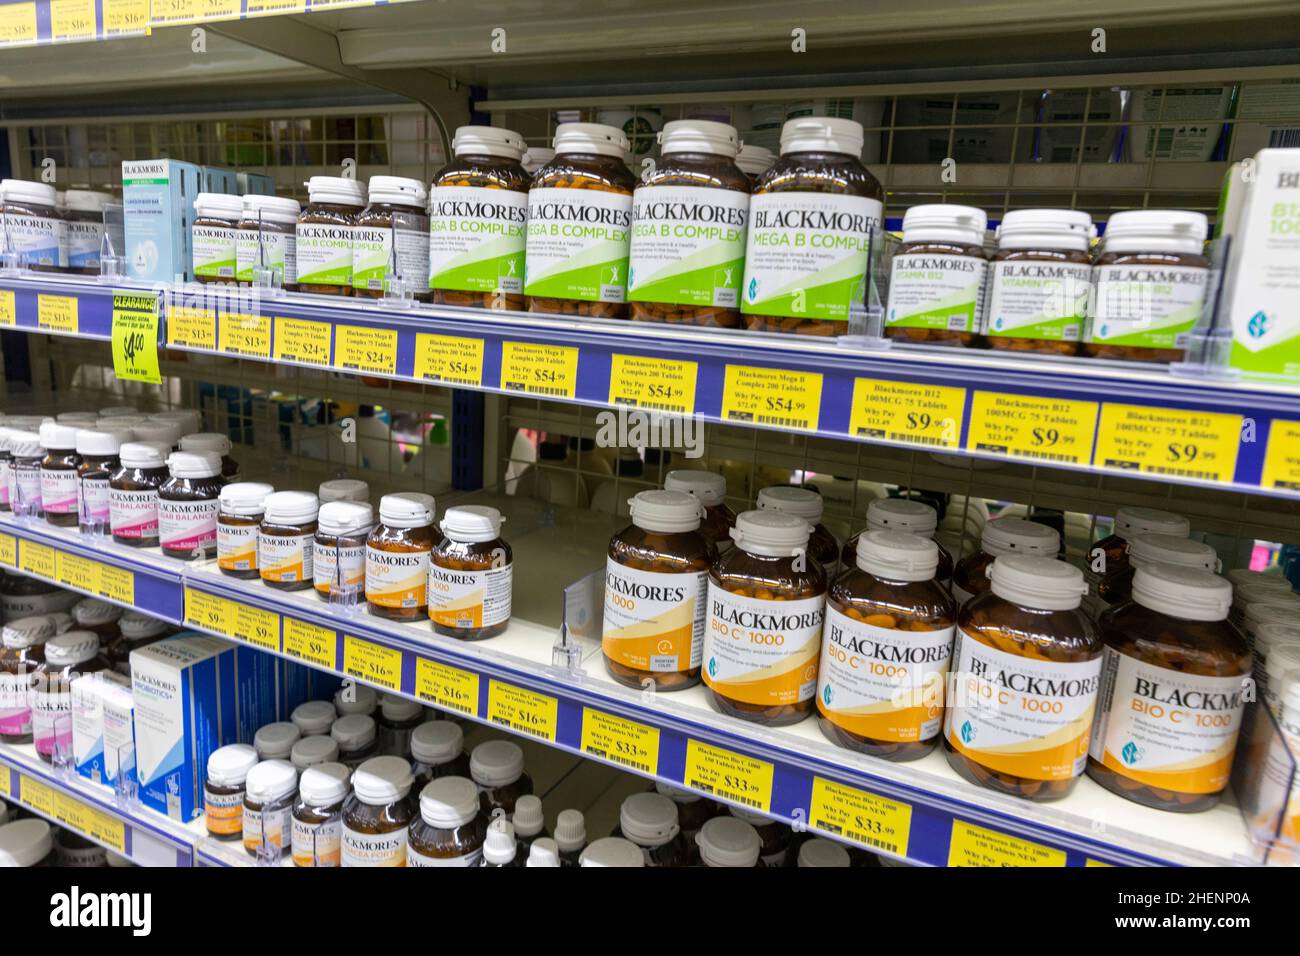 Blackmores vitamins and health supplements for sale in an Australian pharmacy chemist store in Sydney Stock Photo